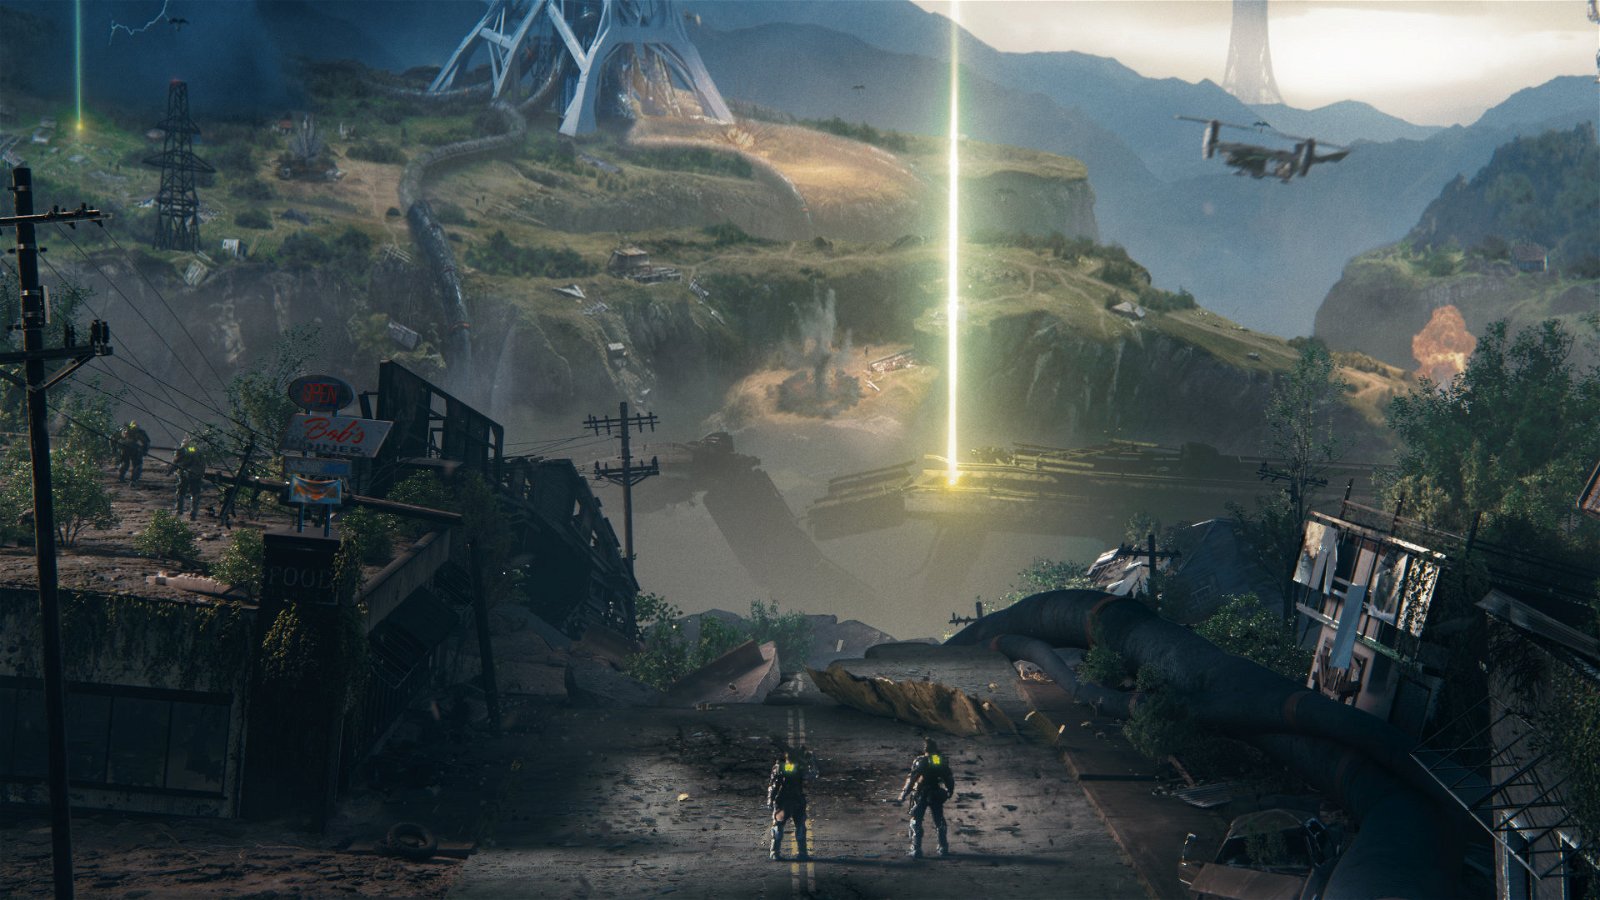 Exoborne is a new extraction shooter coming from the makers